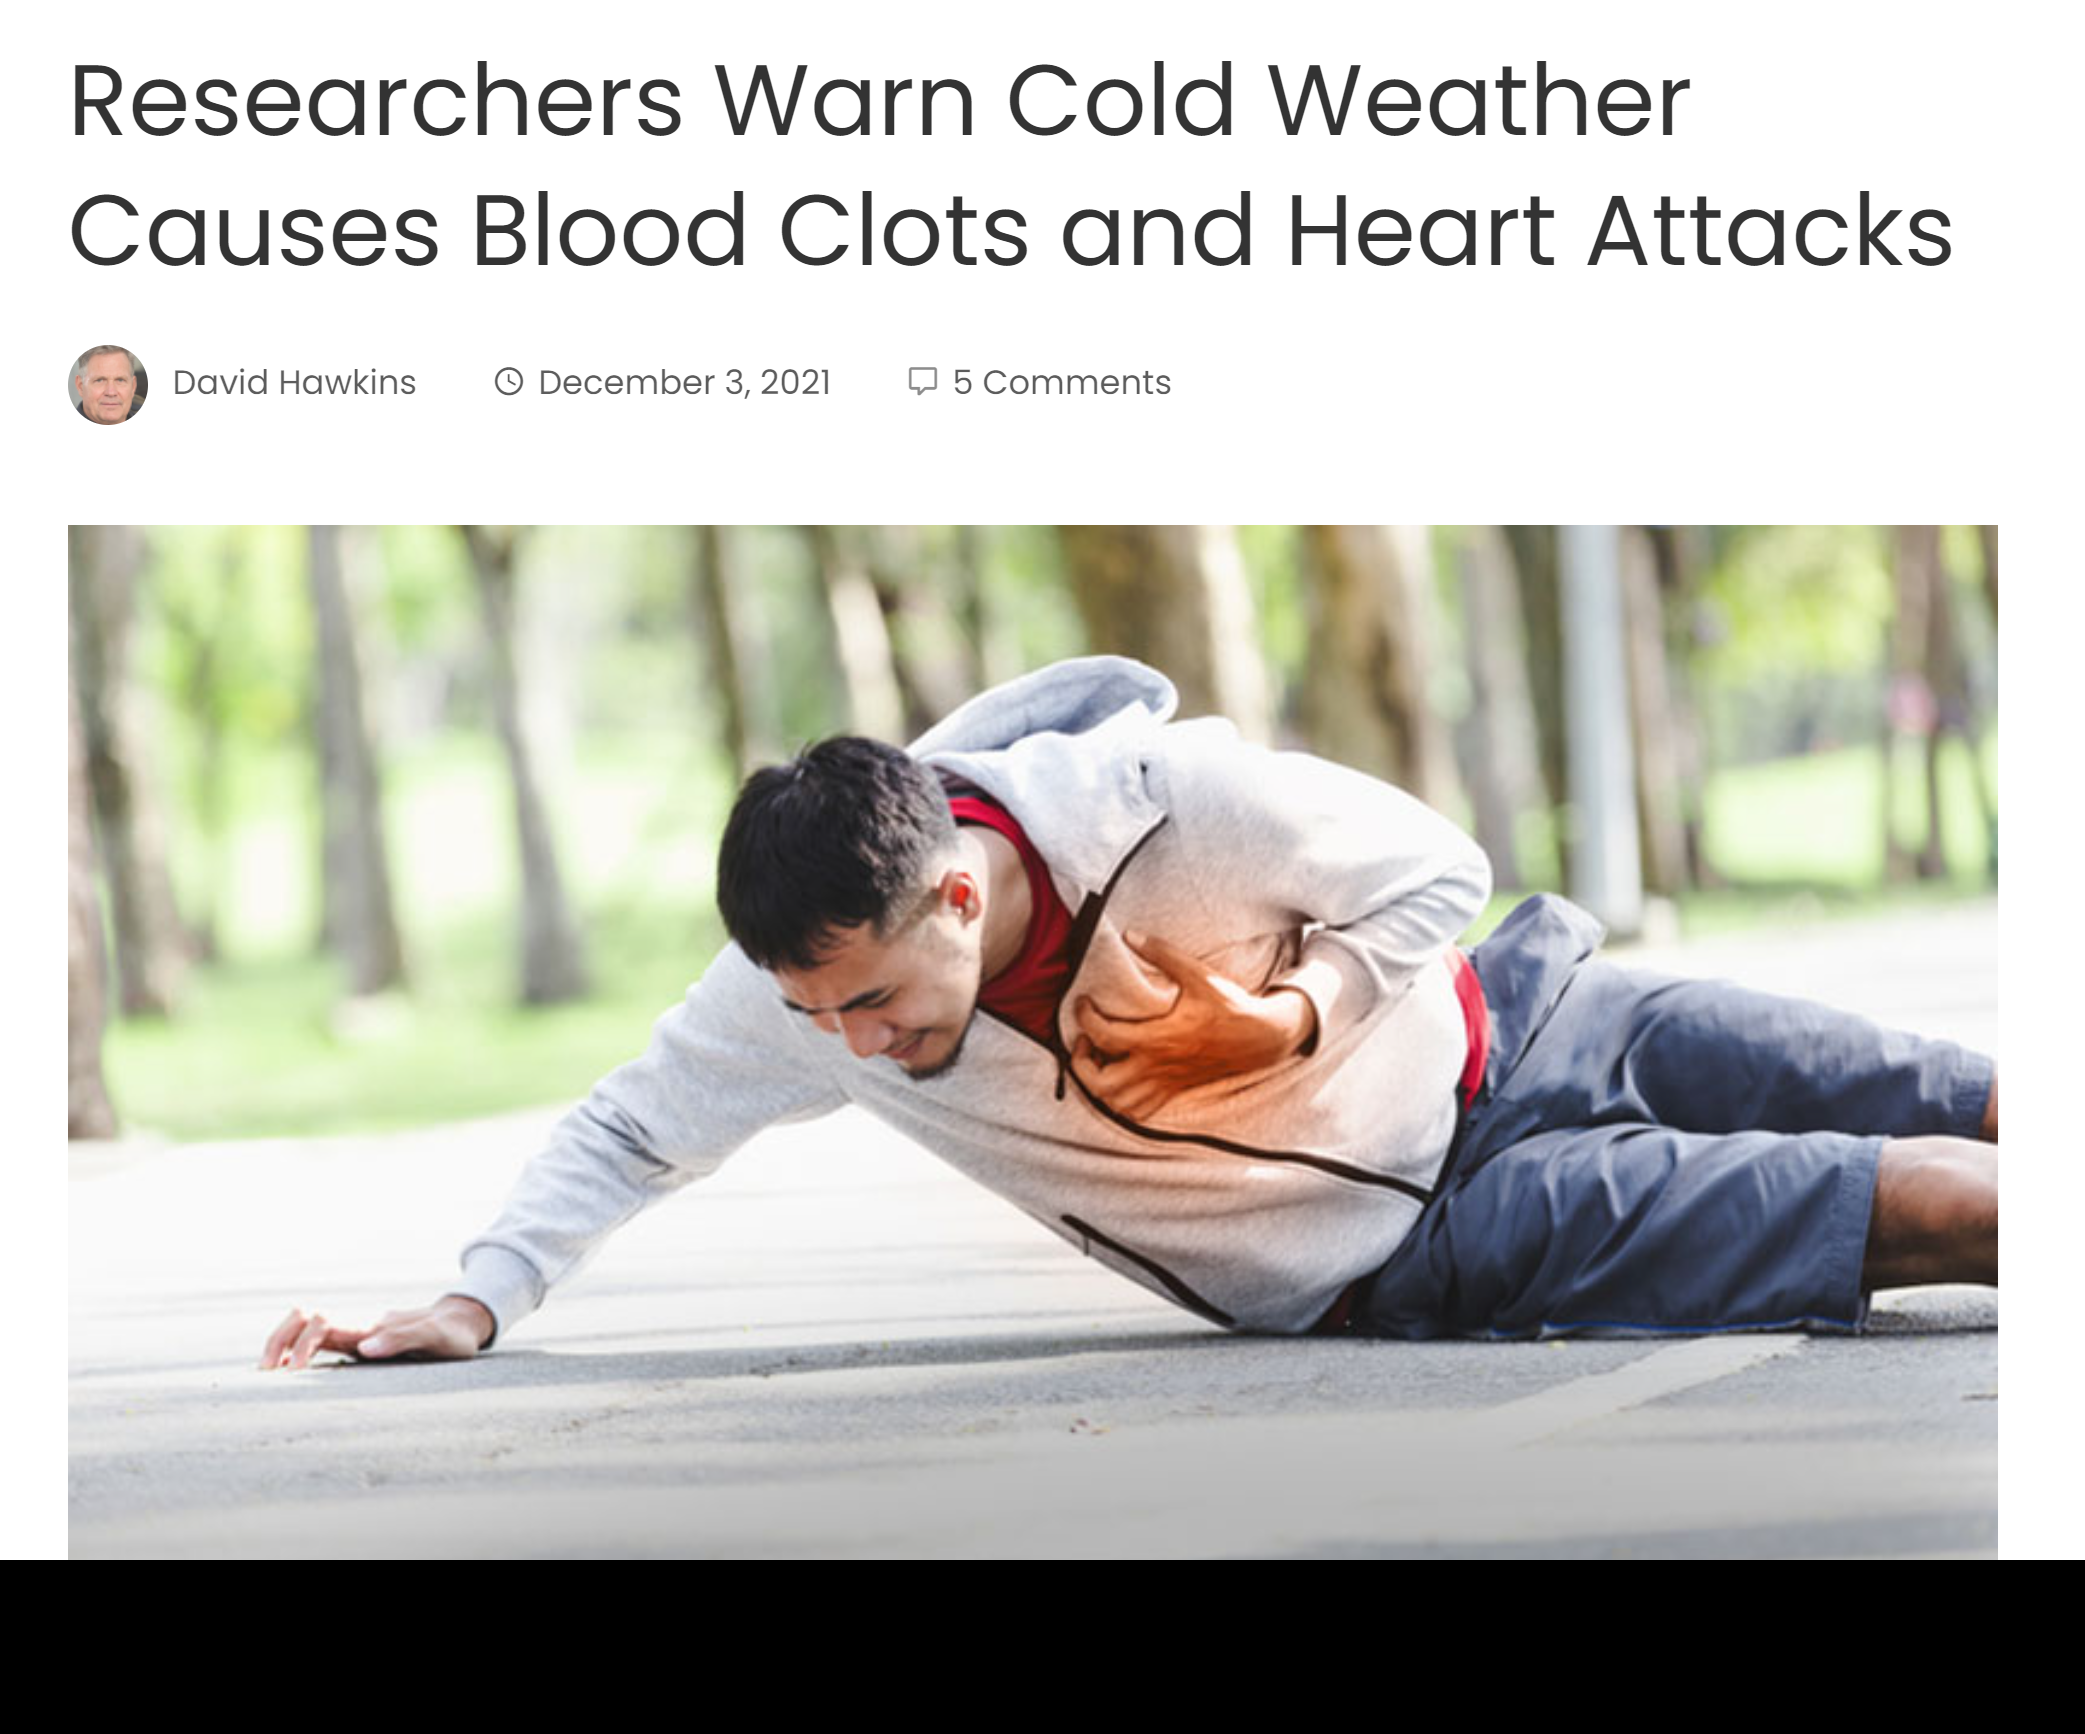 Cover-Up Begins for Vax Damage: Media Outlets Pushing "Cold Weather Causes Heart Attacks"